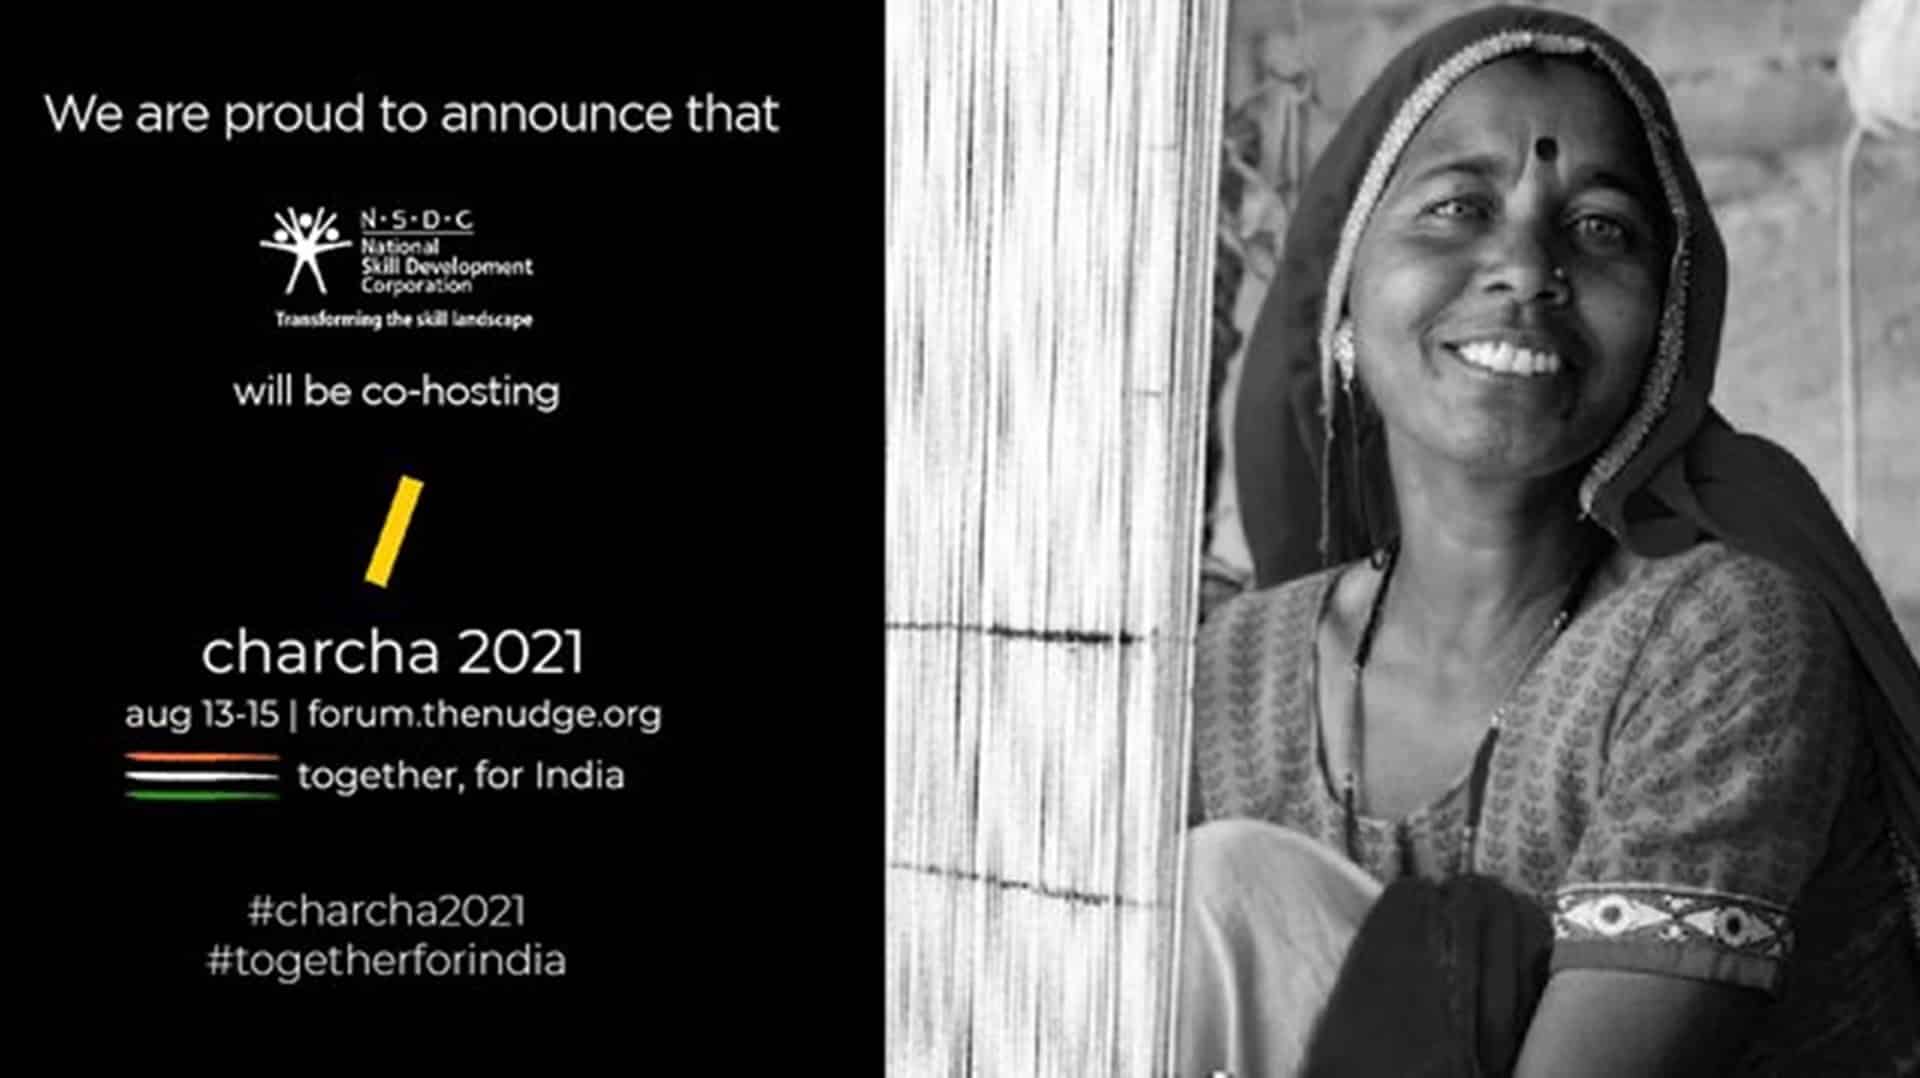 Nudge Foundation convenes charcha 2021 from Aug 13-15 to energize nation towards development goals